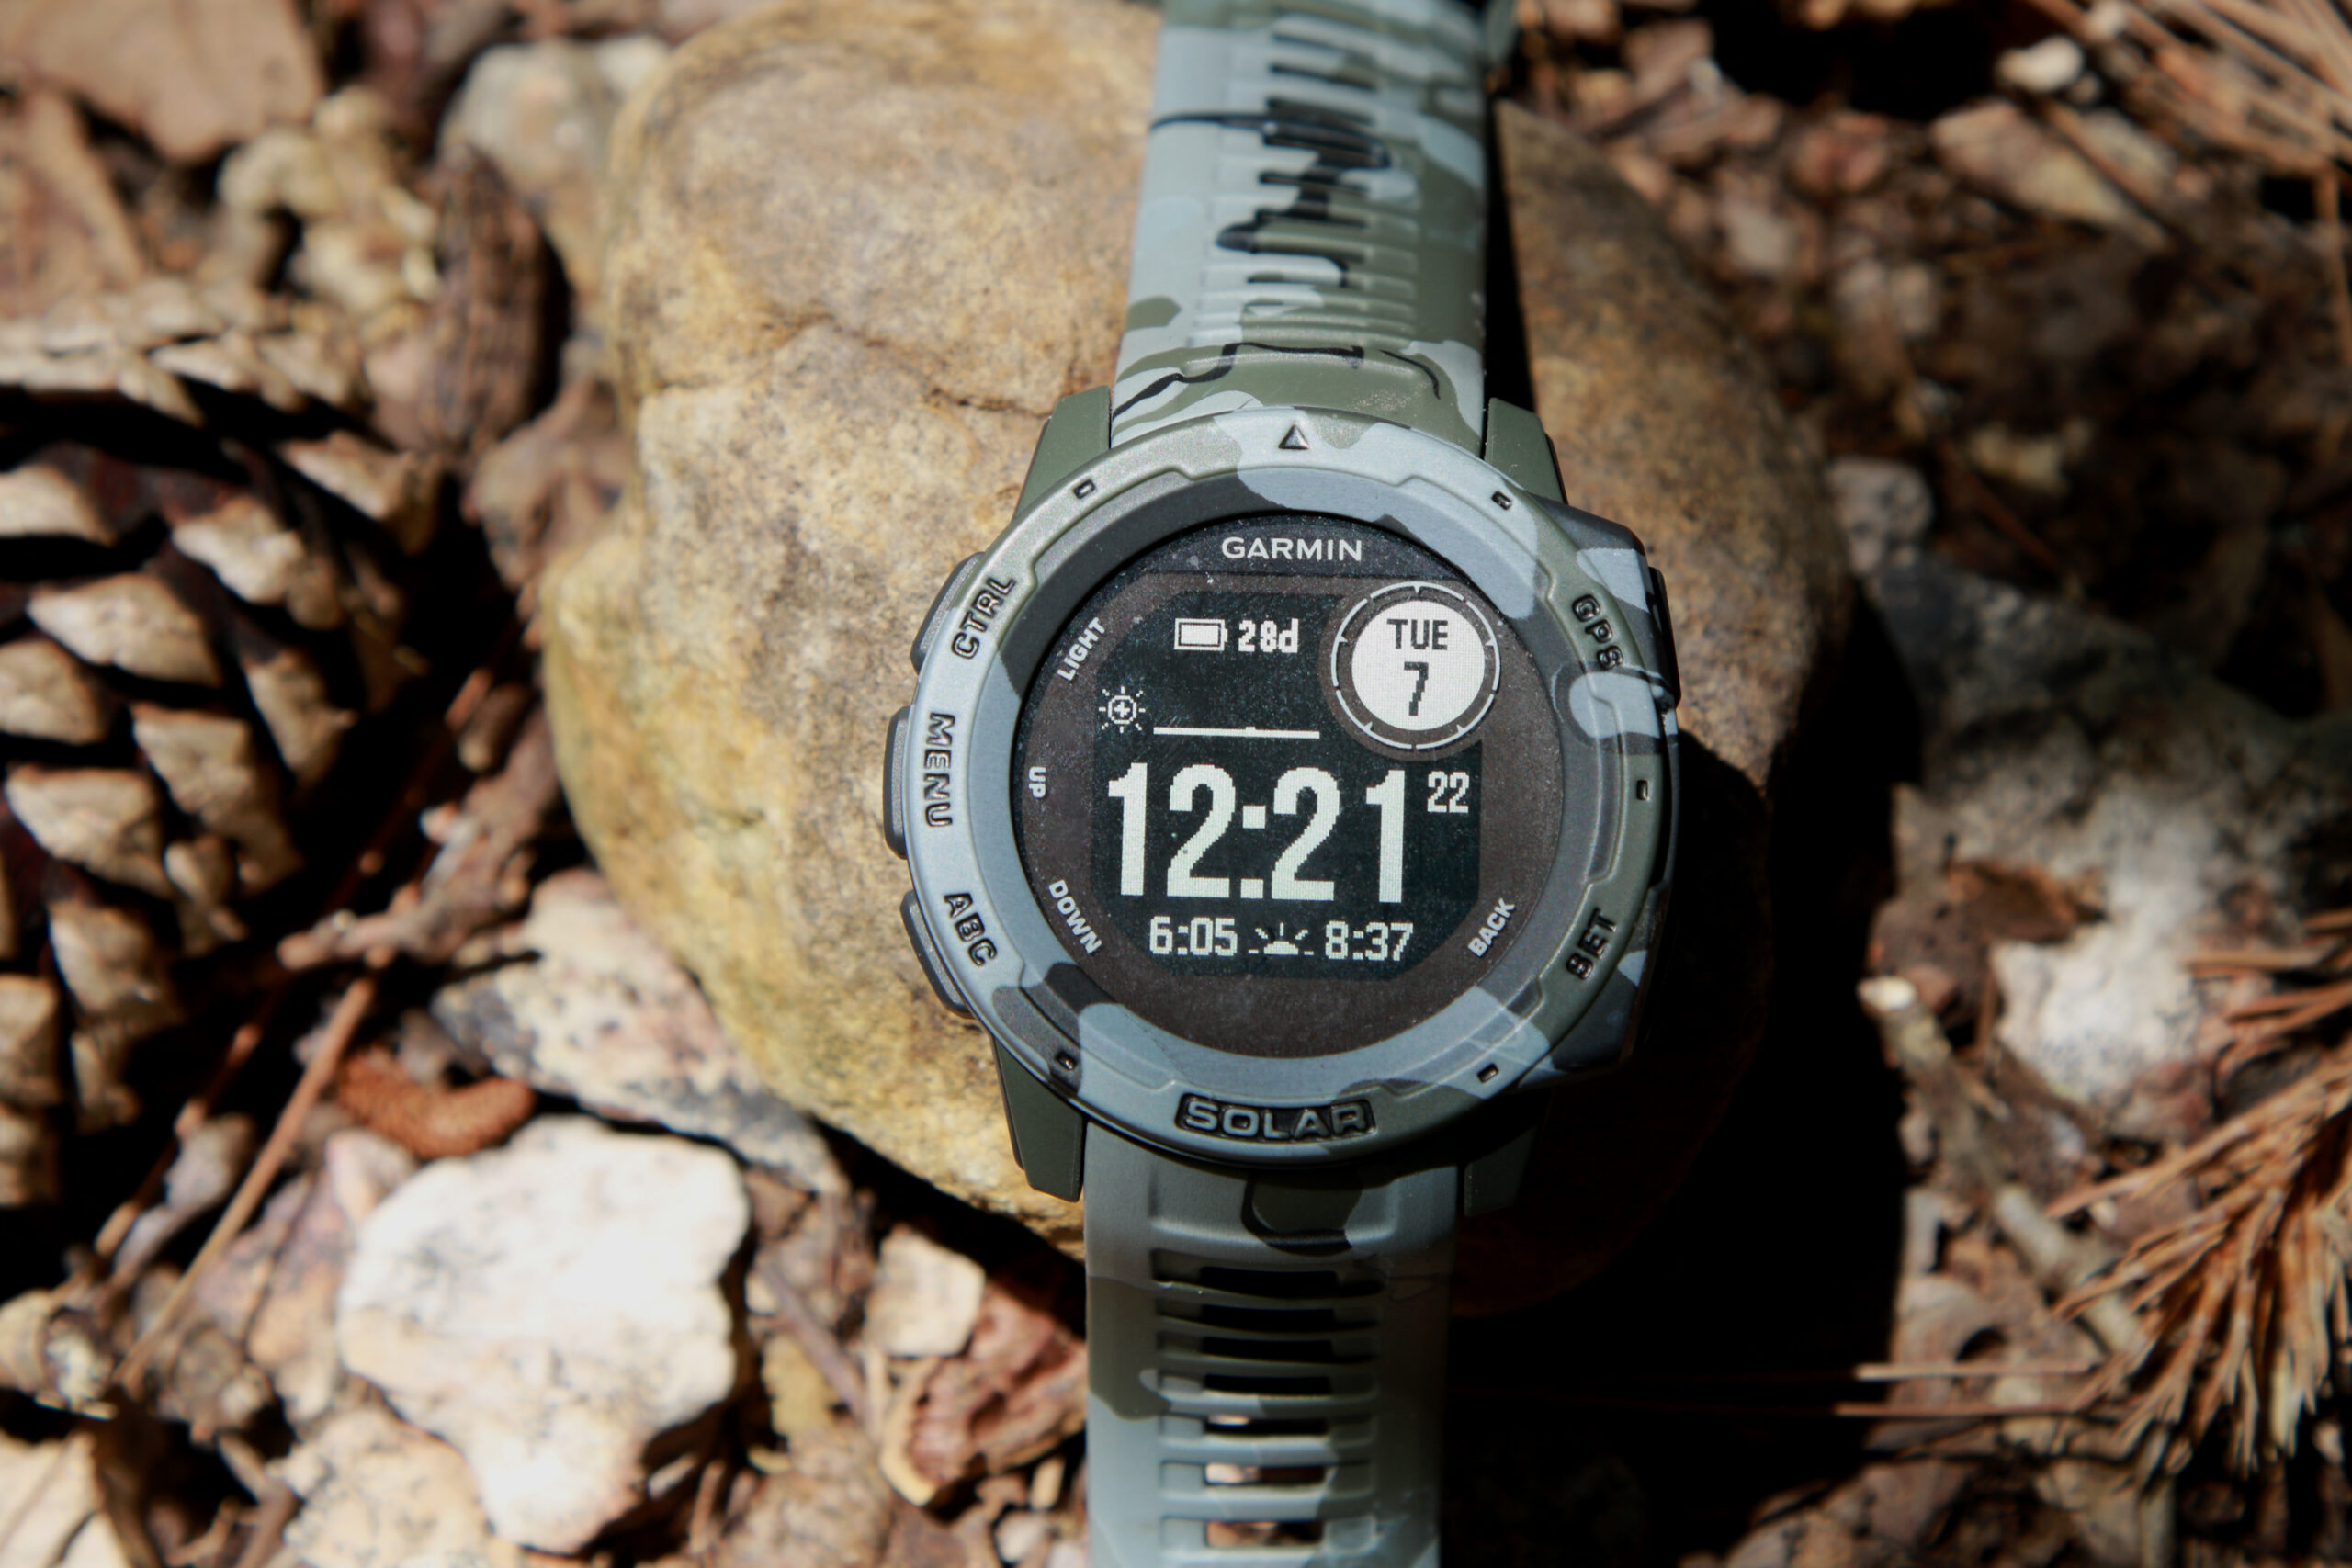 A camo watch displaying the time 12:21 and a battery life of 28 days on a rocky background.